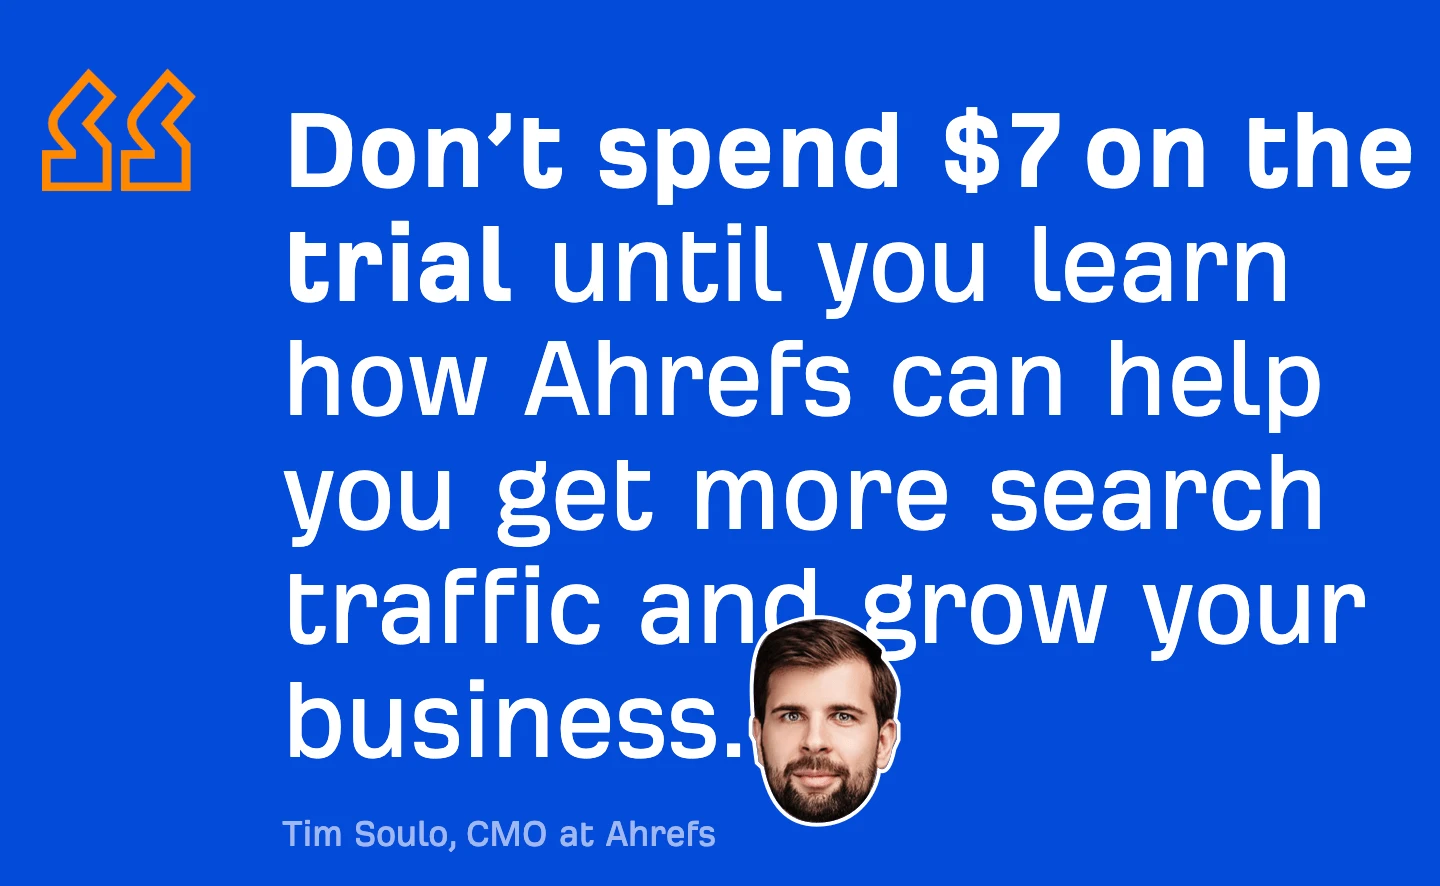 Ahrefs CMO Tim Soulo cautioning people not to buy the $7, seven-day trial until they learn more about Ahrefs